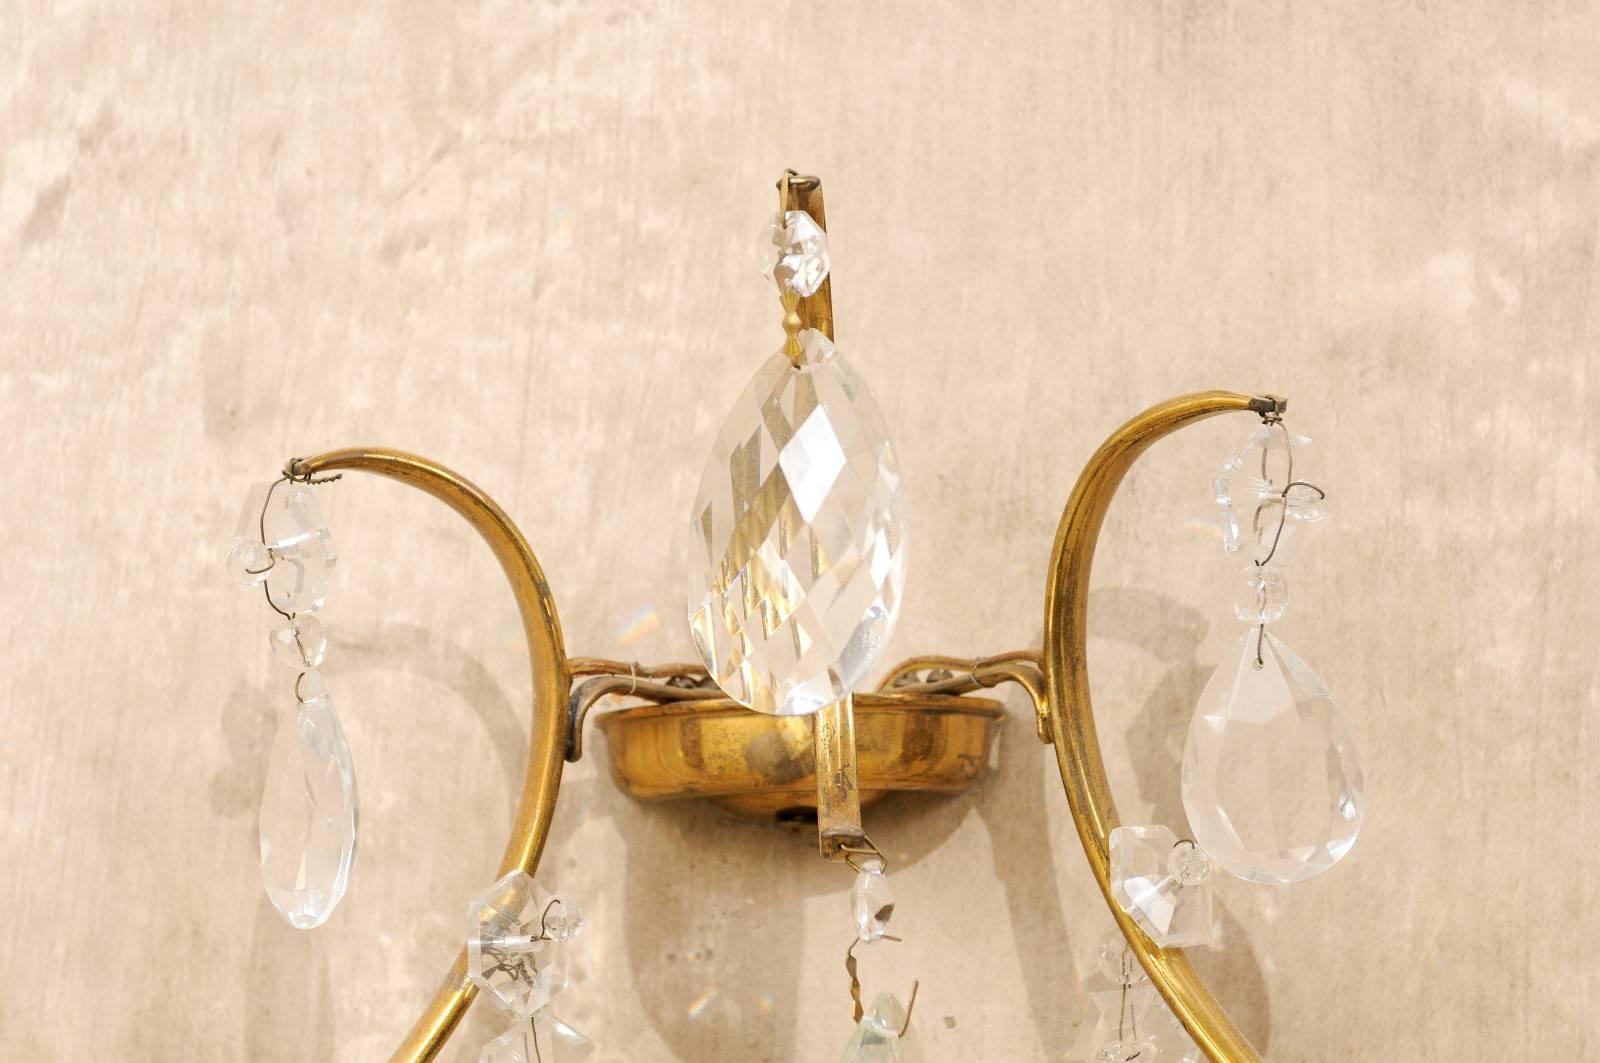 Iron Pair of Neutral Cream Colored Crystal Sconces on Oval Wood Plaques, Two-Light